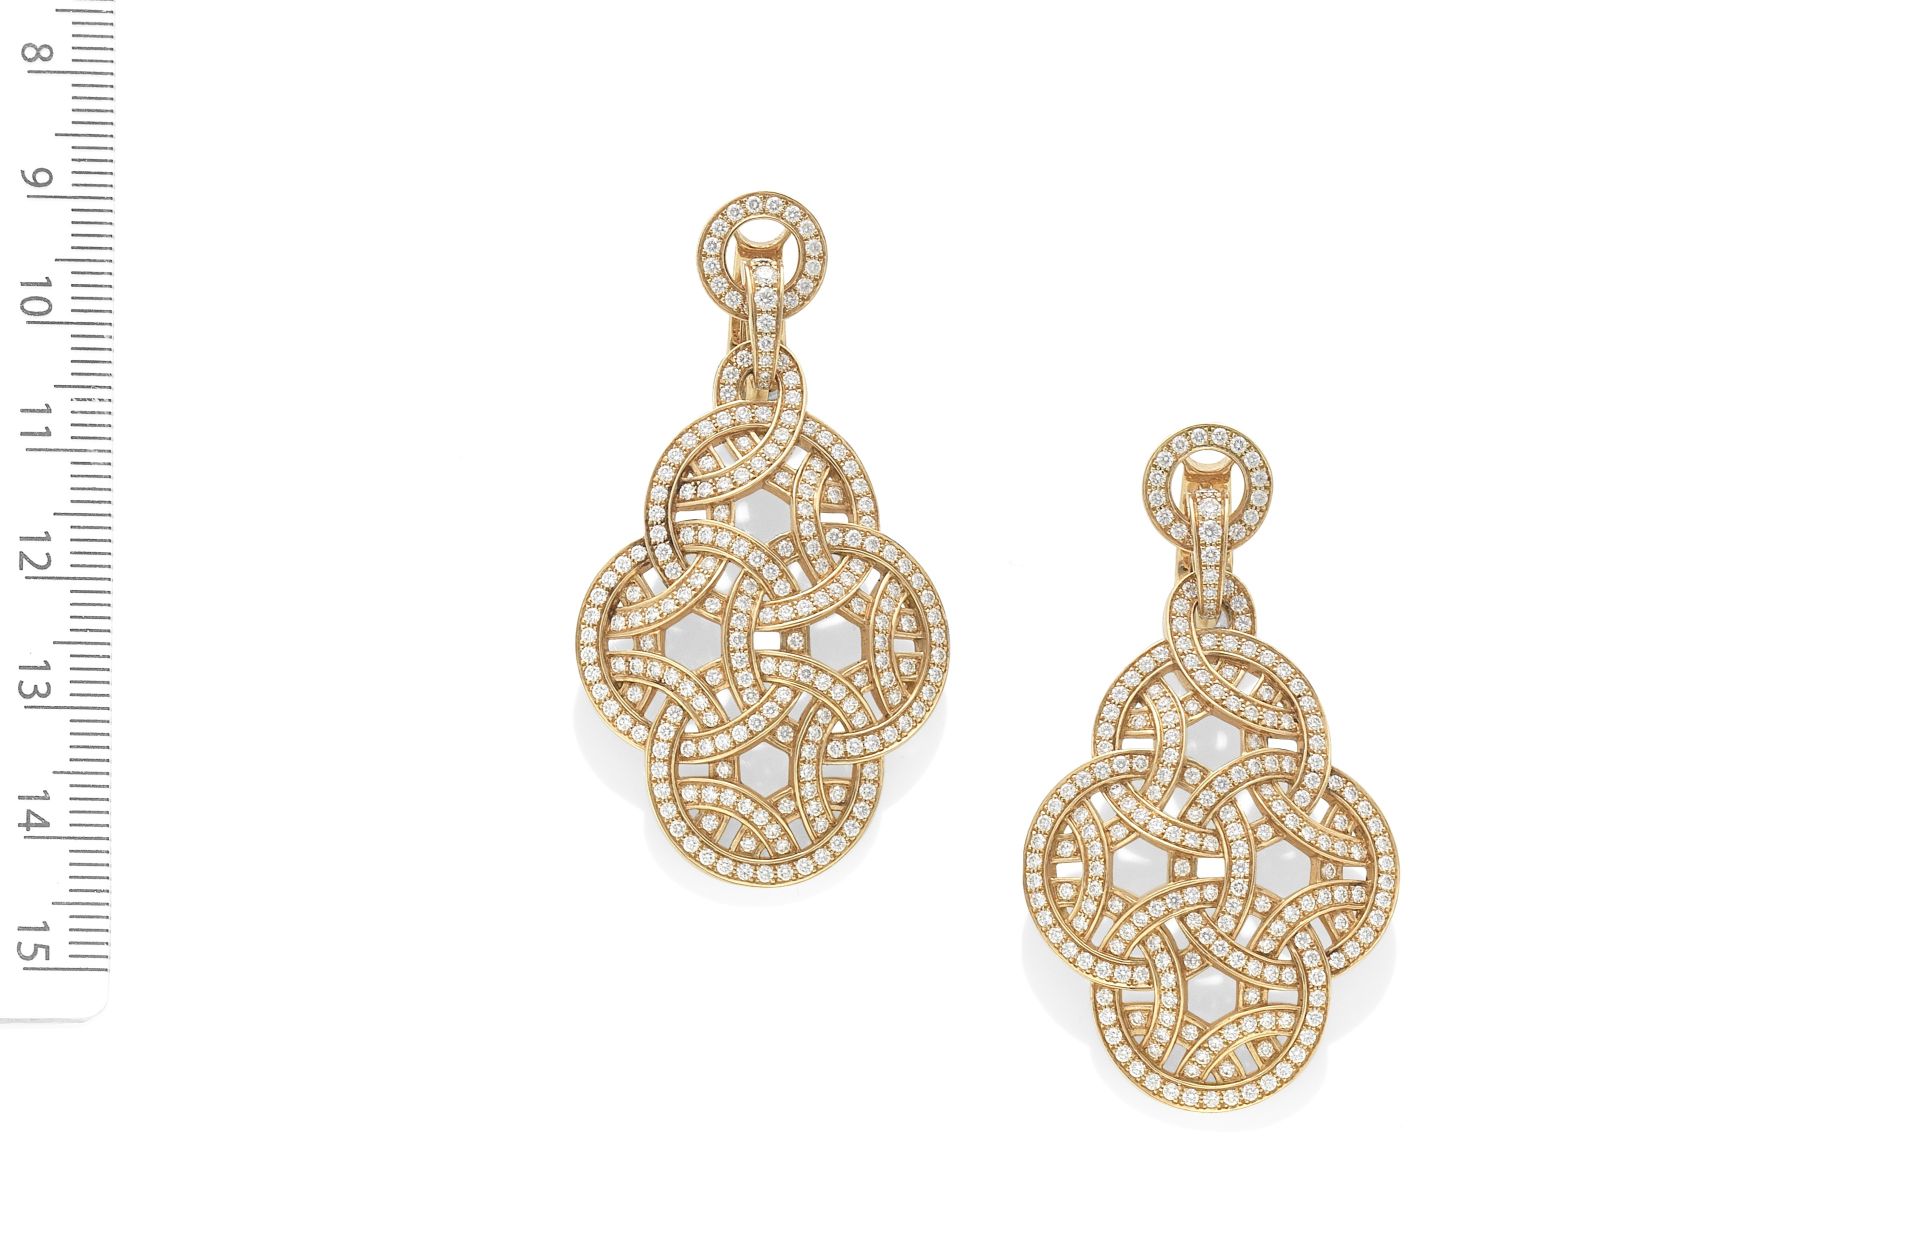 CARTIER: GOLD AND DIAMOND EARCLIPS